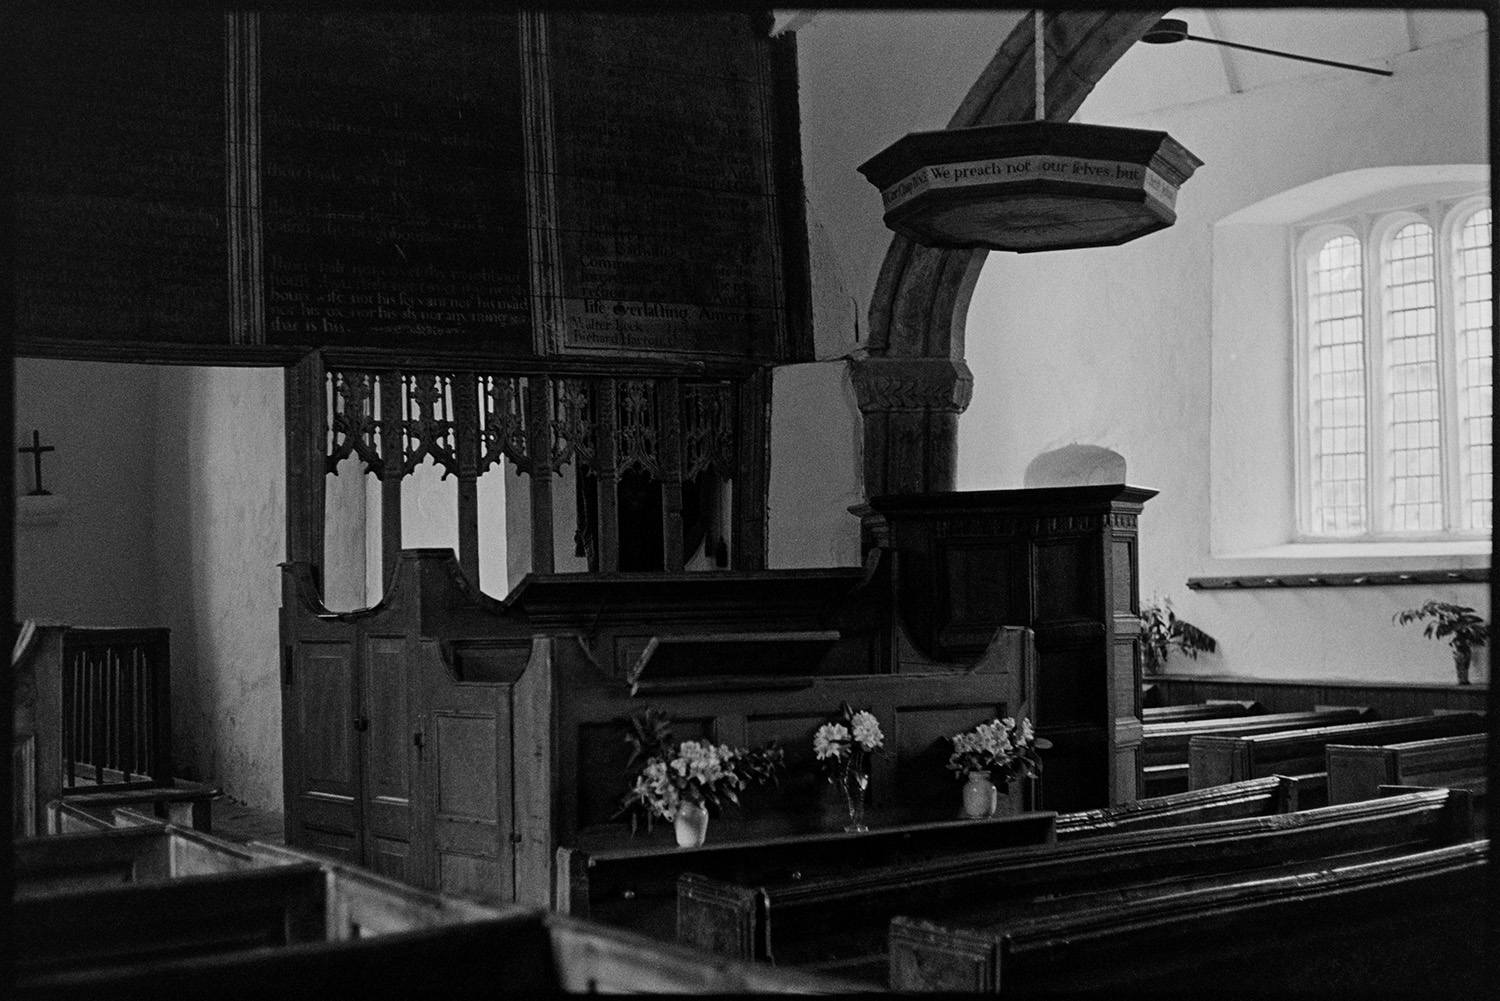 Interior and exterior of redundant church.
[The interior of a redundant church at Parracombe showing wooden pews, a wooden pulpit with a hood and floral decorations.]